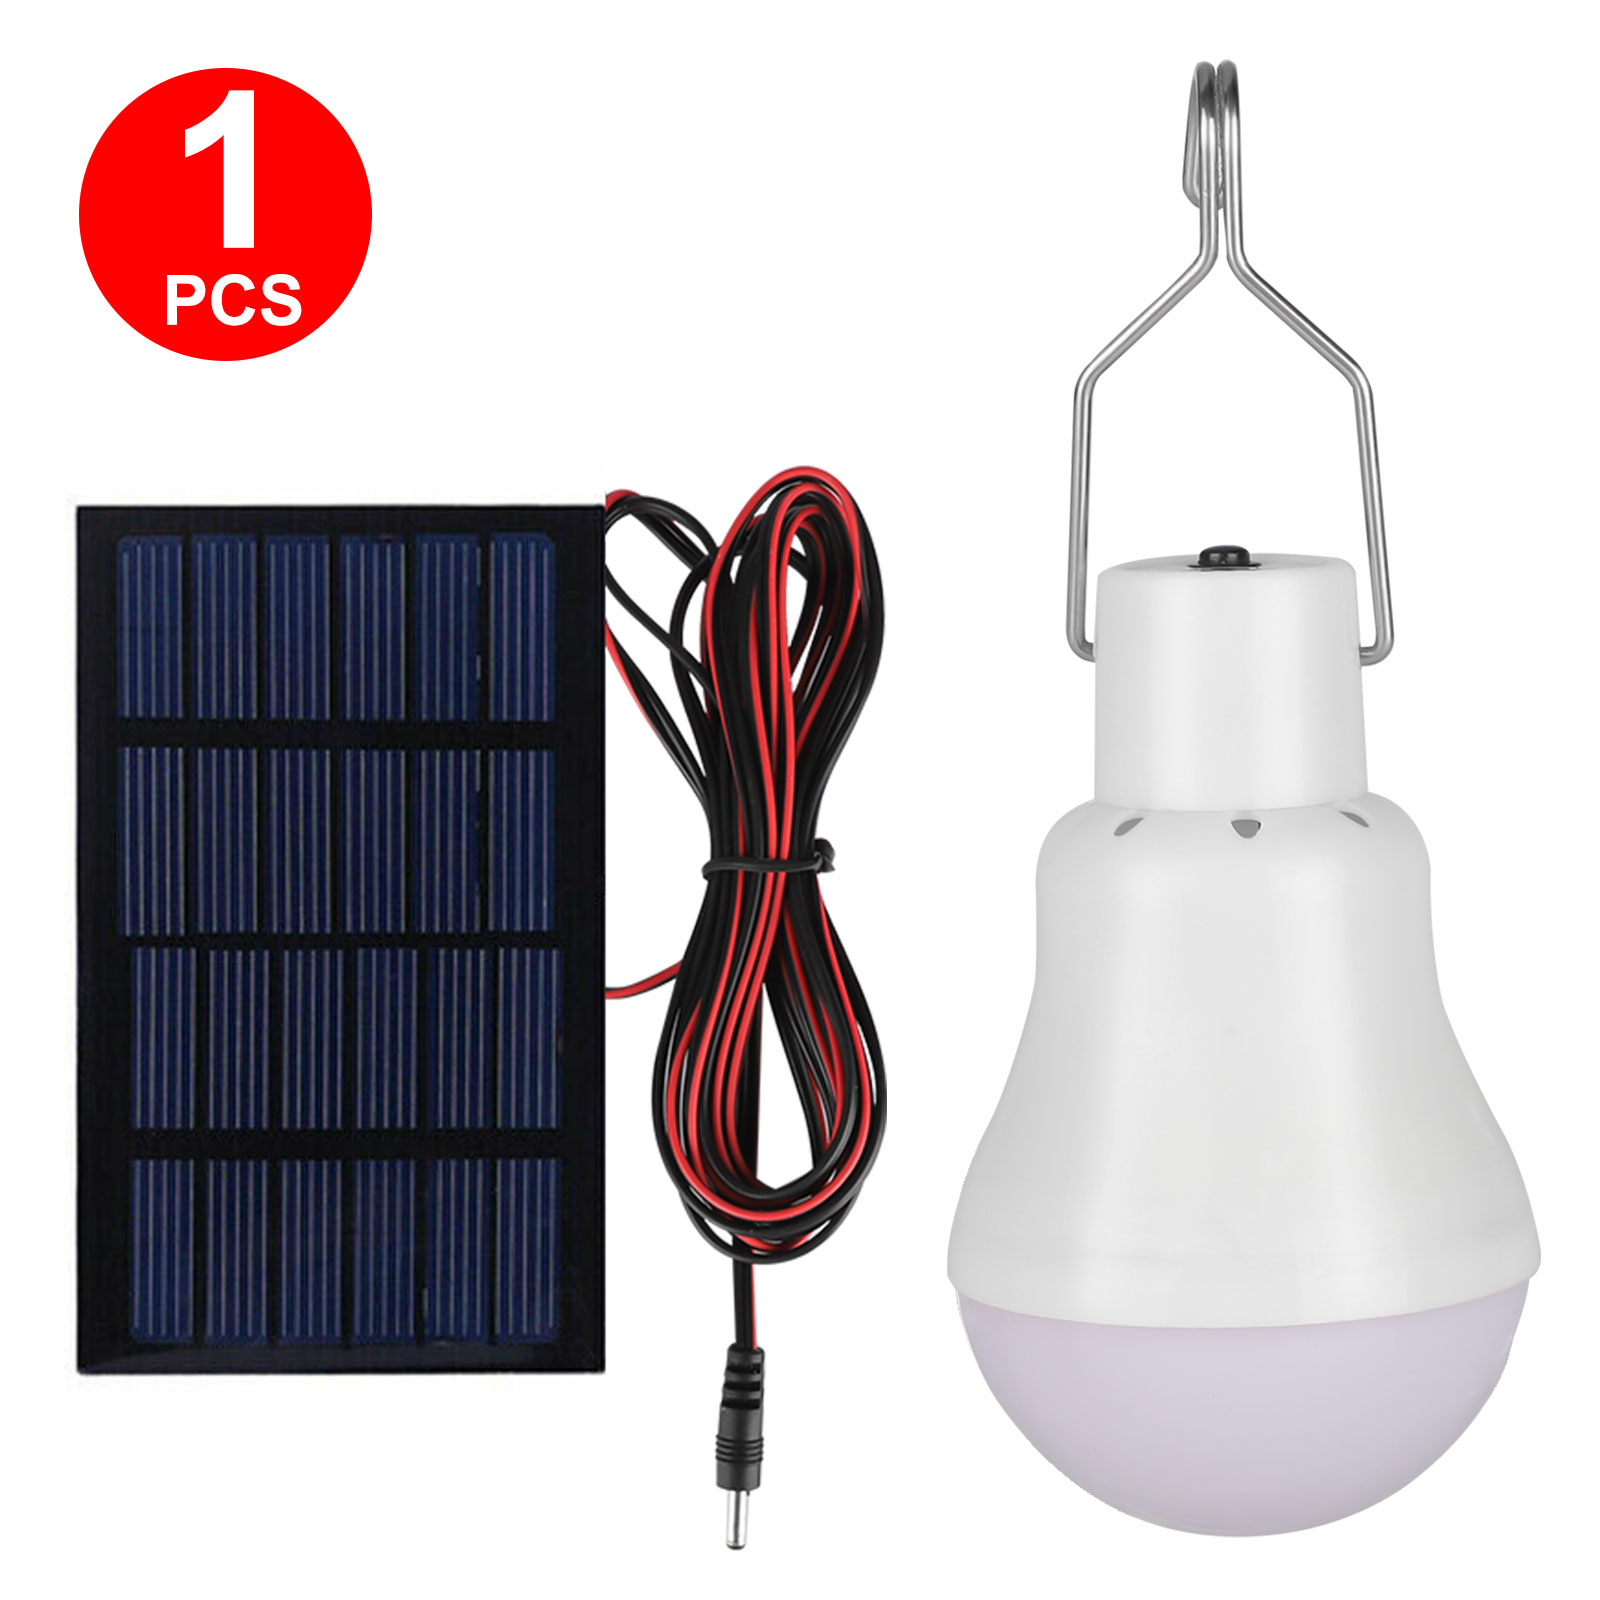 Portable LED Solar Powered Bulb Light Panel For Outdoor Garden Camping Yard Lamp 